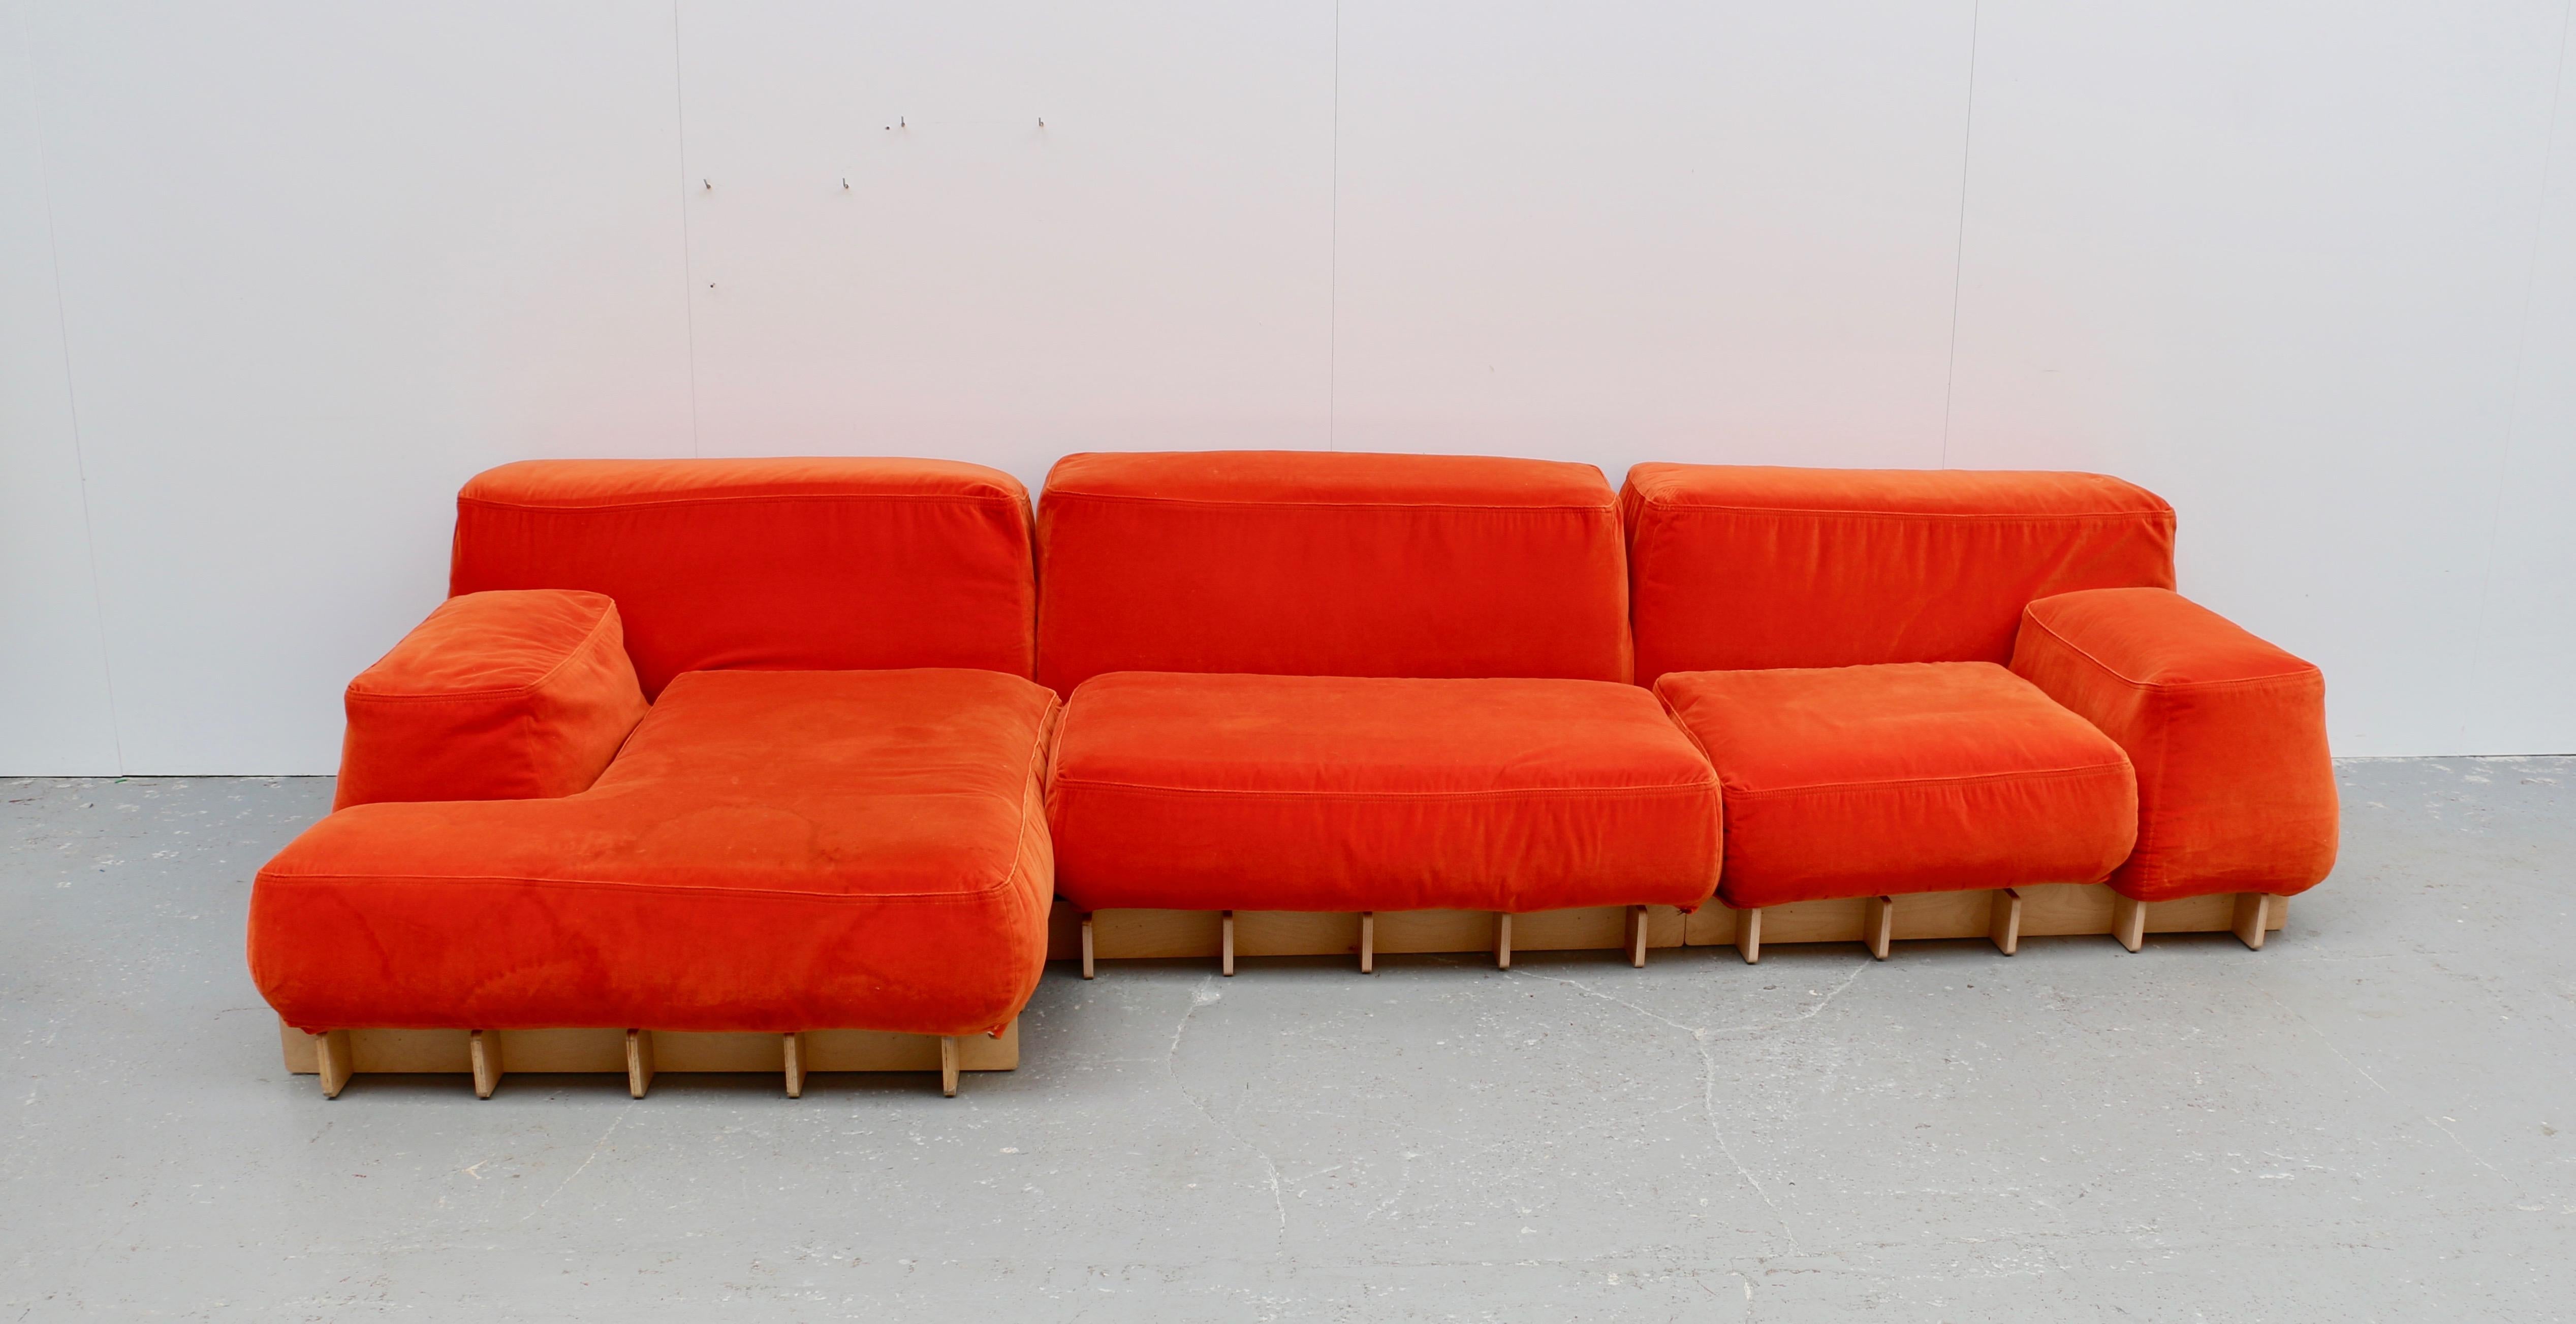 This large modular sofa is composed of a meridian, a lounge chair and an armchair on a light wood base. The color and the shape are very original and it's very confortable.